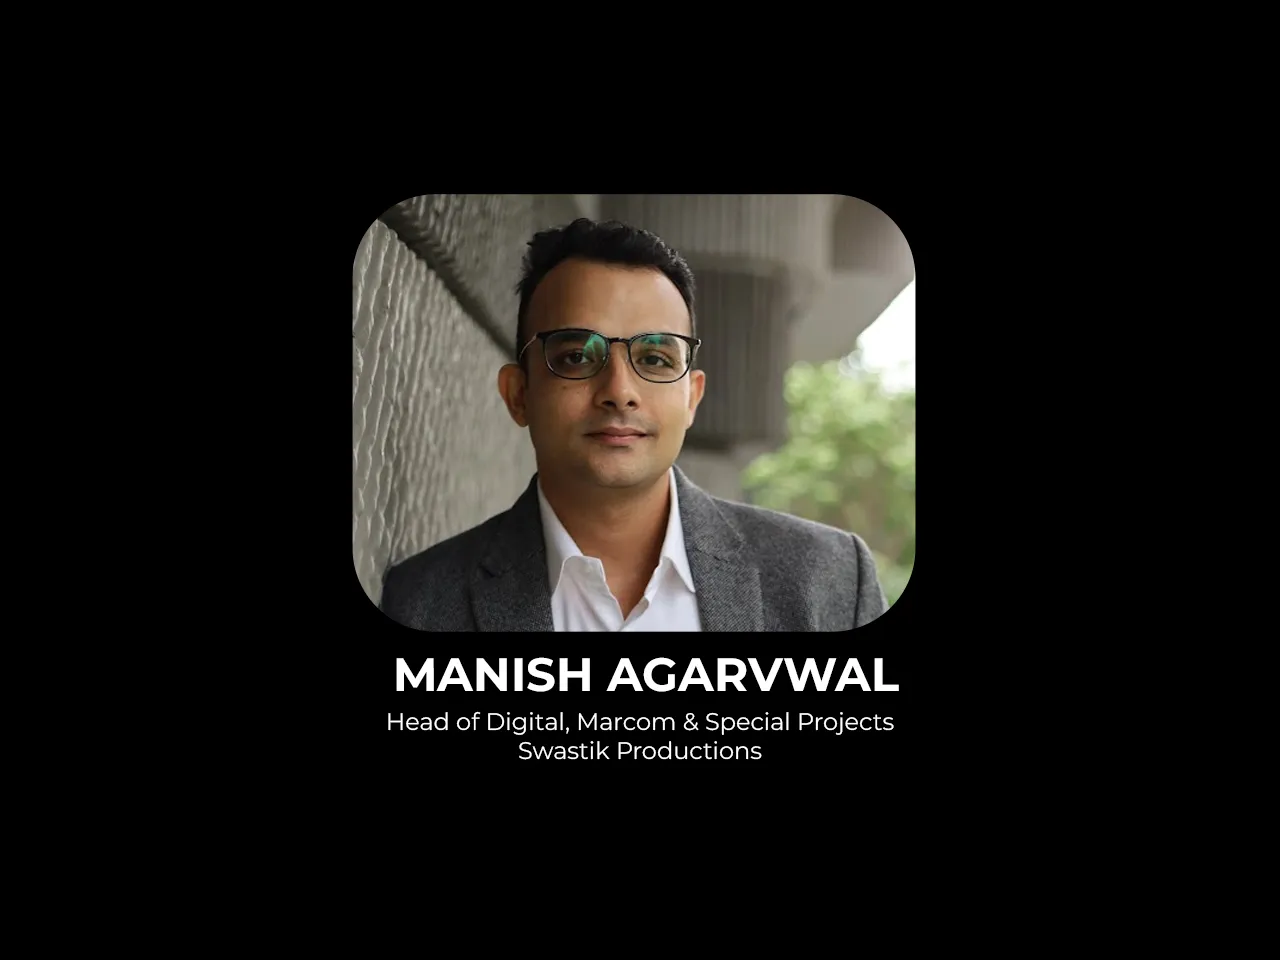 Swastik Productions appoints Manish Agarvwal as Head of Digital, Marcom & Special Projects